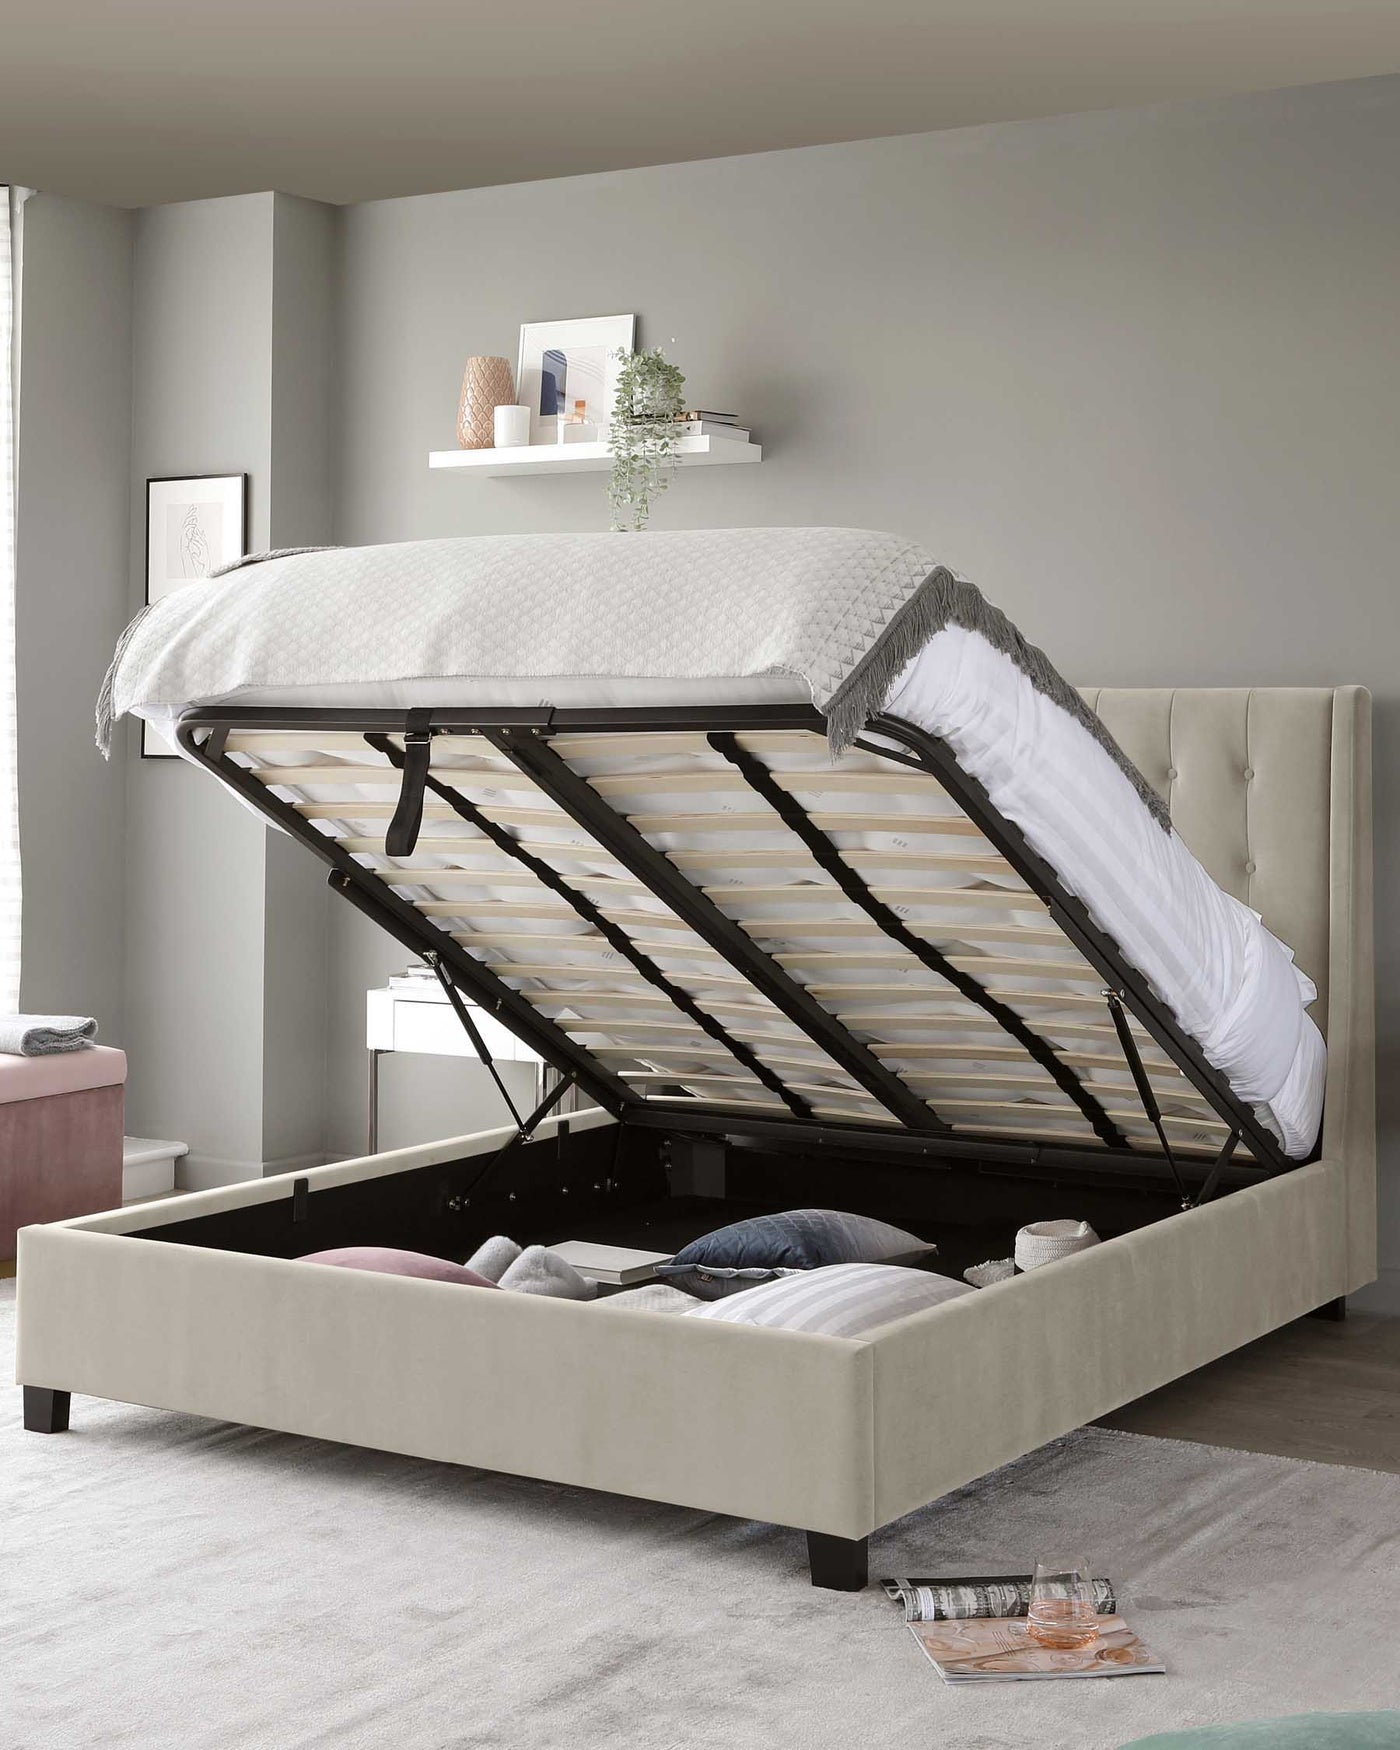 Upholstered platform storage bed in beige with an open lift-up frame revealing spacious under-bed storage, set in a contemporary bedroom setting with a neutral colour scheme.